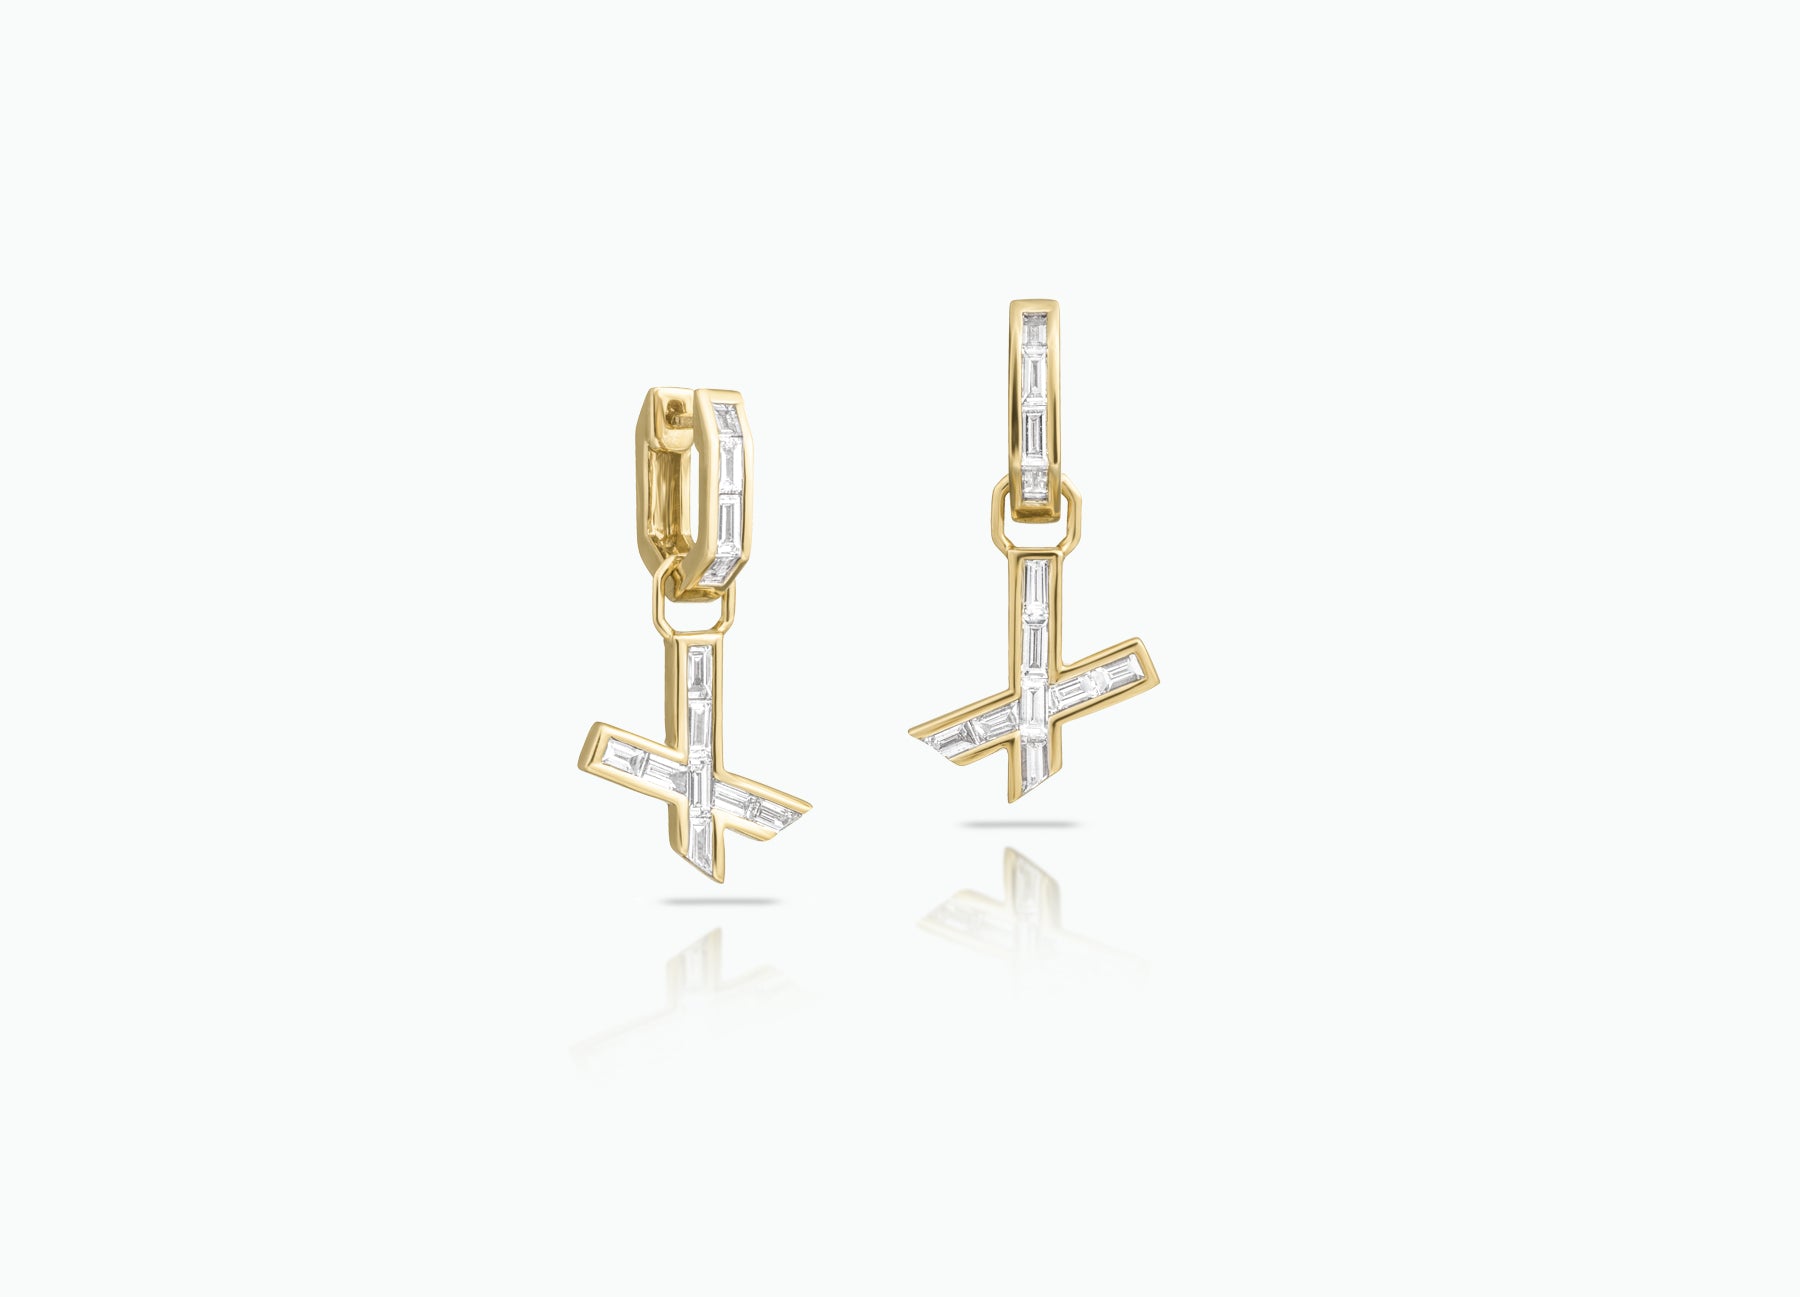 Huggie earrings with detachable Kiss Extensions. Made from rose, yellow or white 18k Gold with baguette-cut GVS white Diamonds.